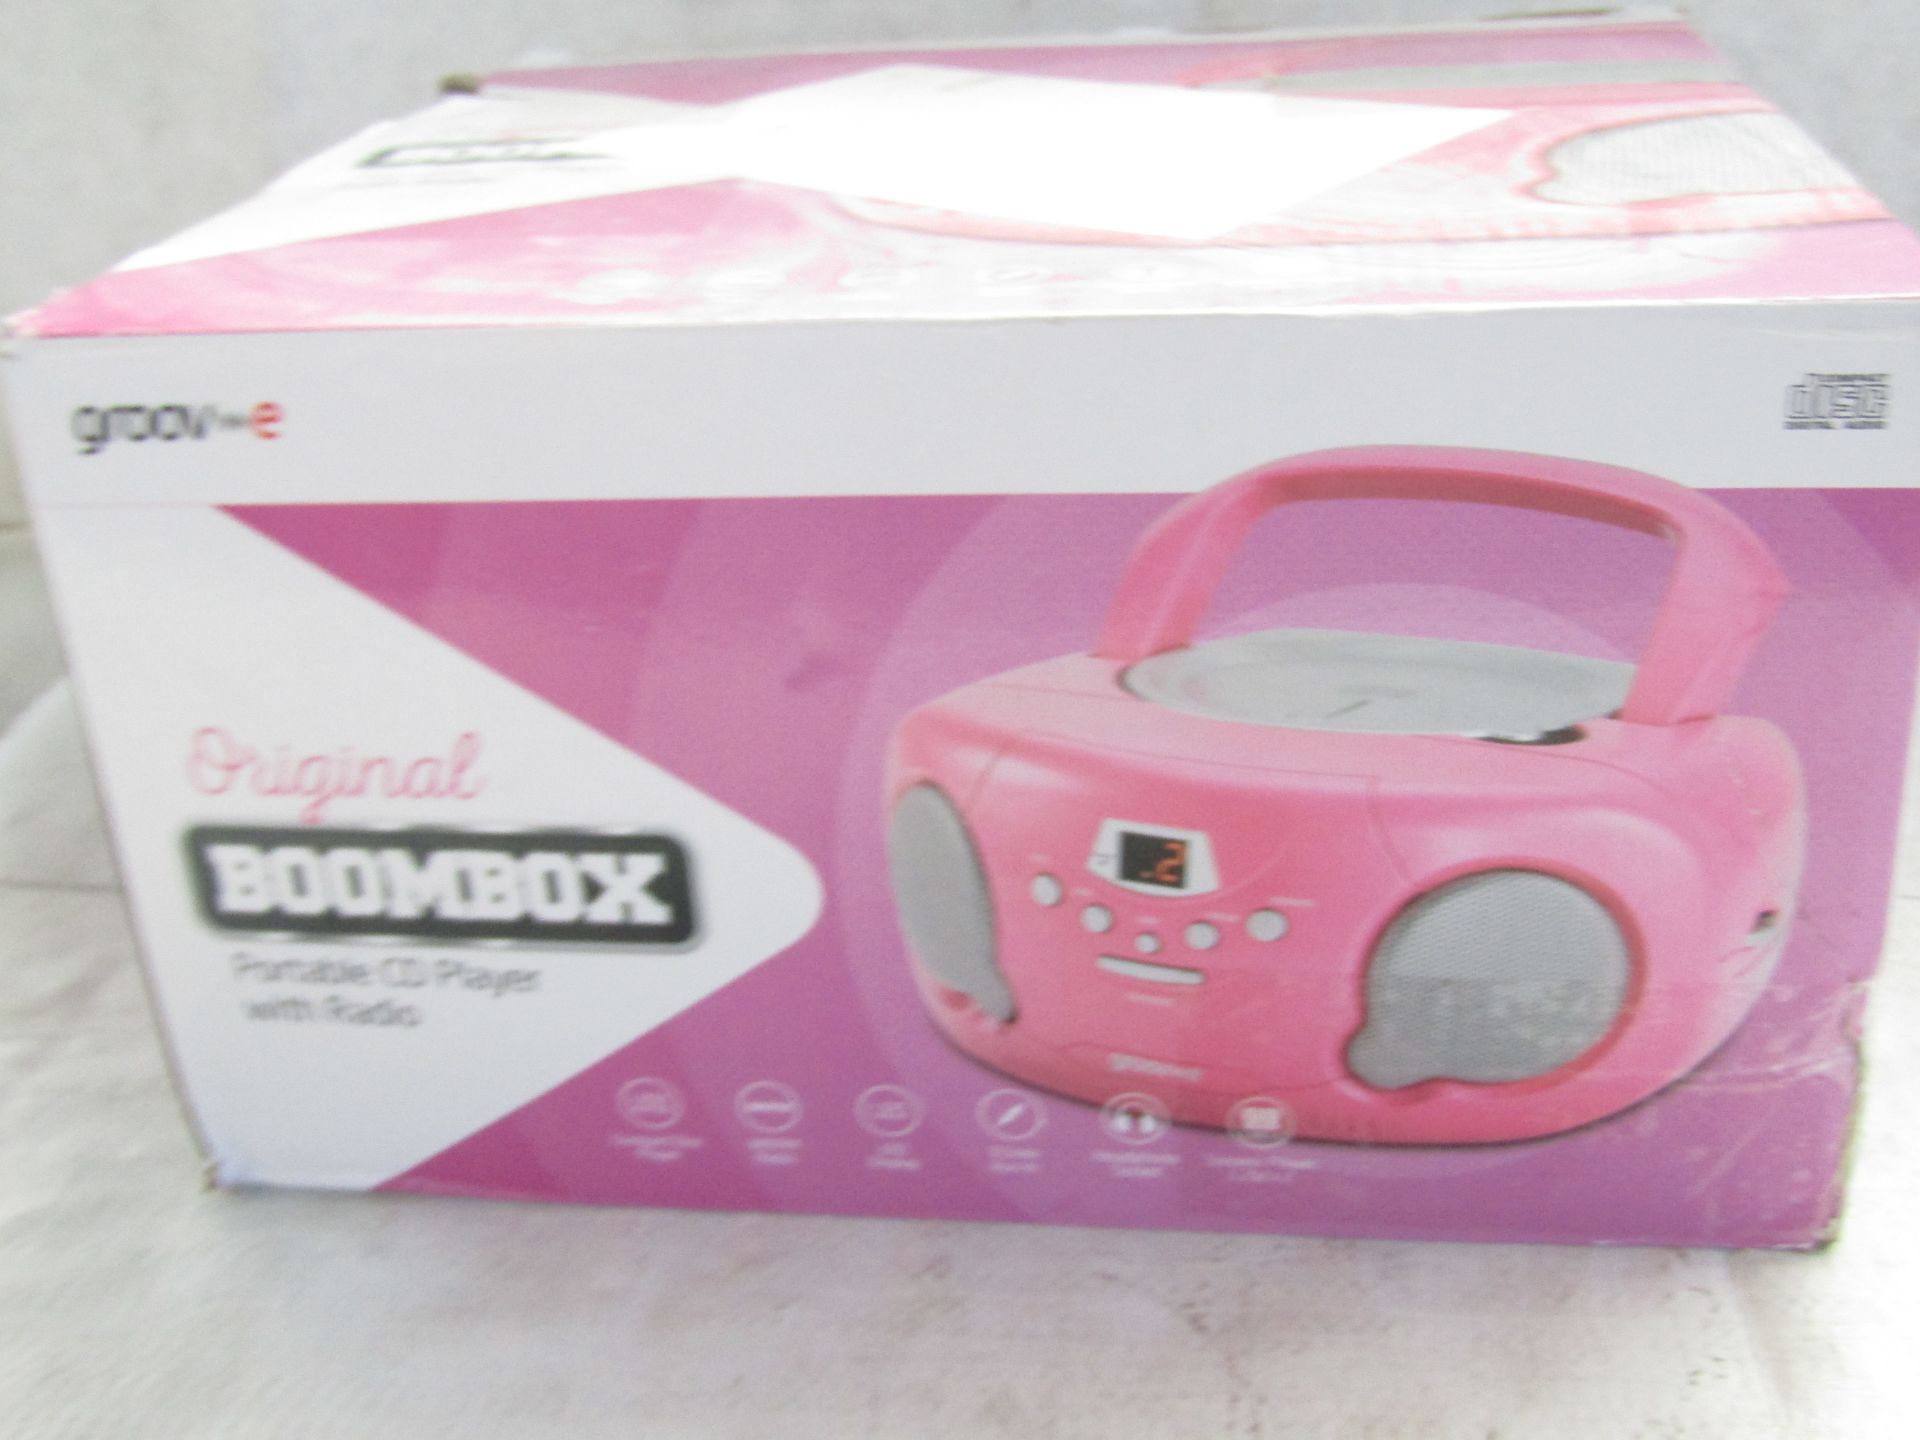 Groove Boombox Portable CD Player With Radio, Pink - Unchecked & Boxed.